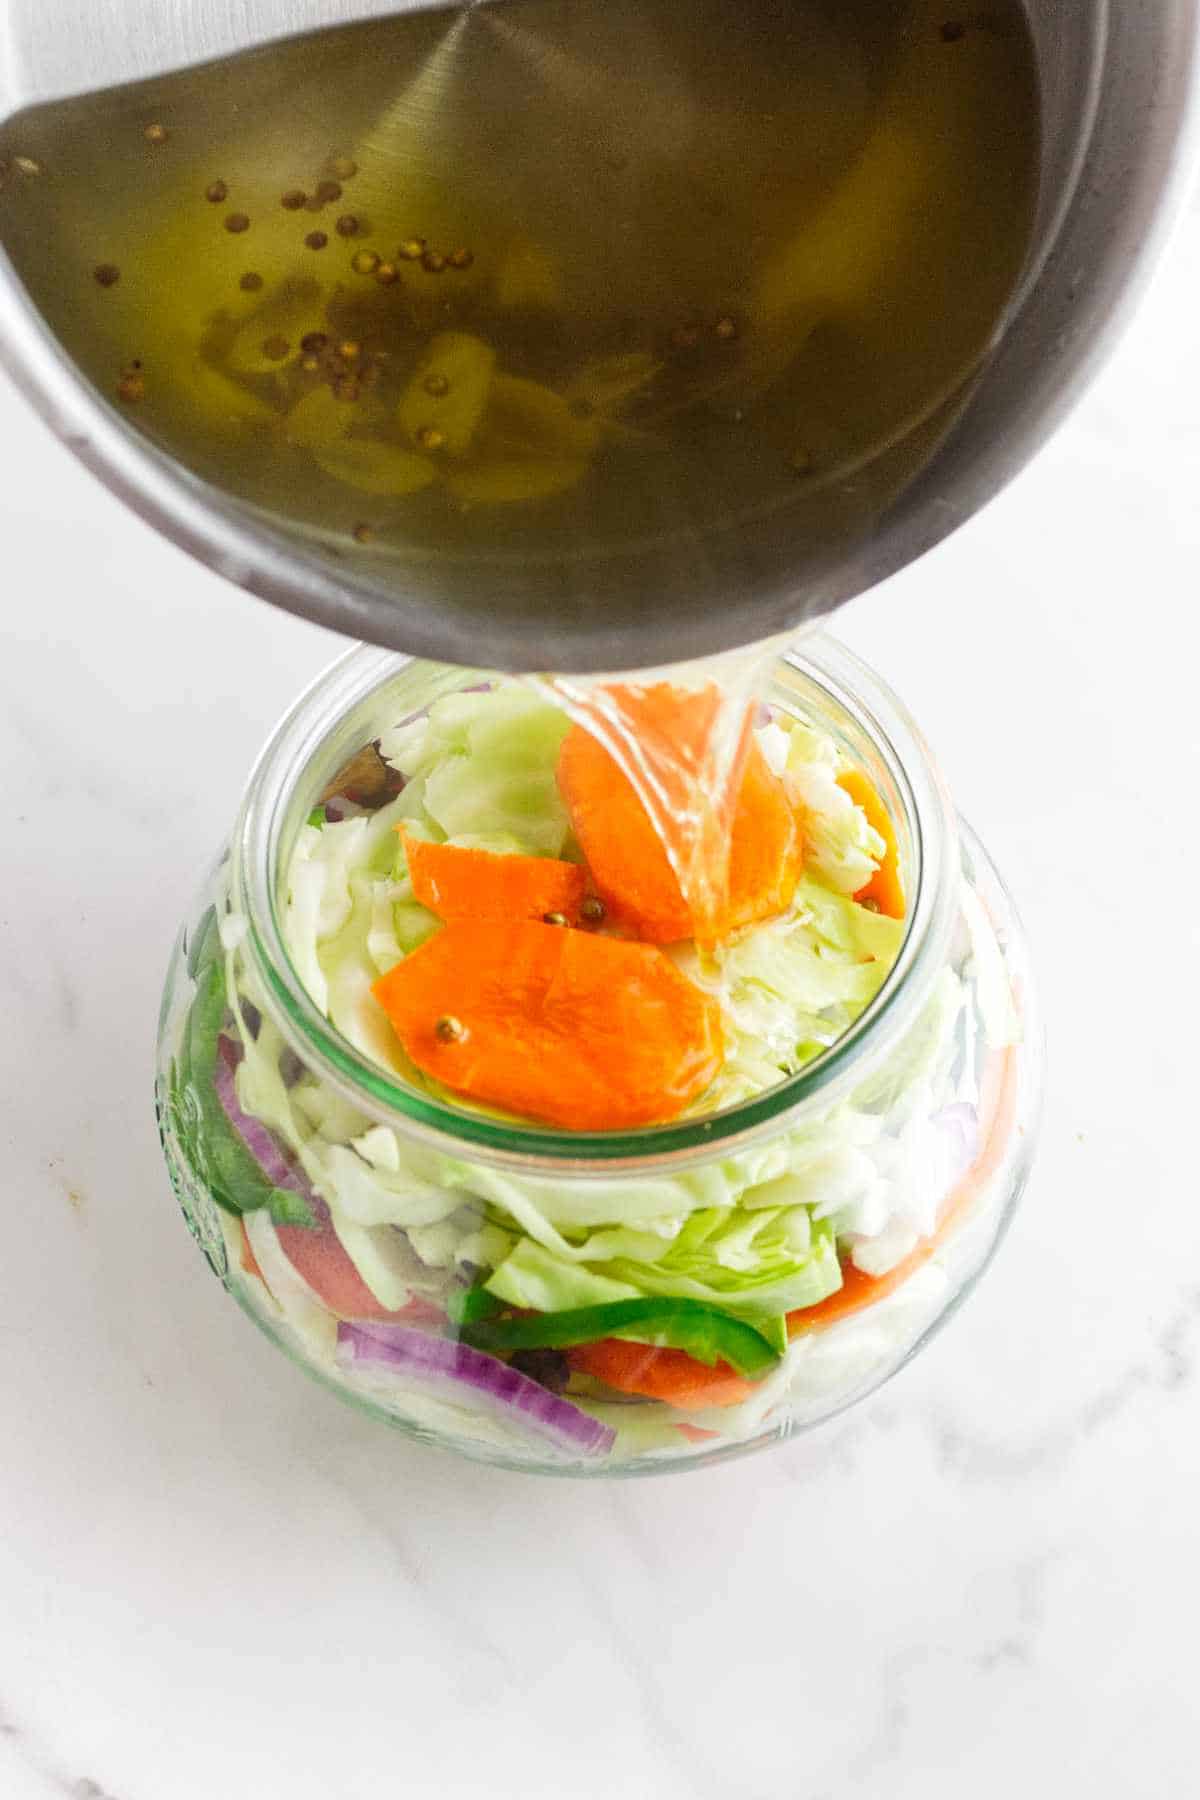 hot pickling brine poured into jars of raw packed vegetables.